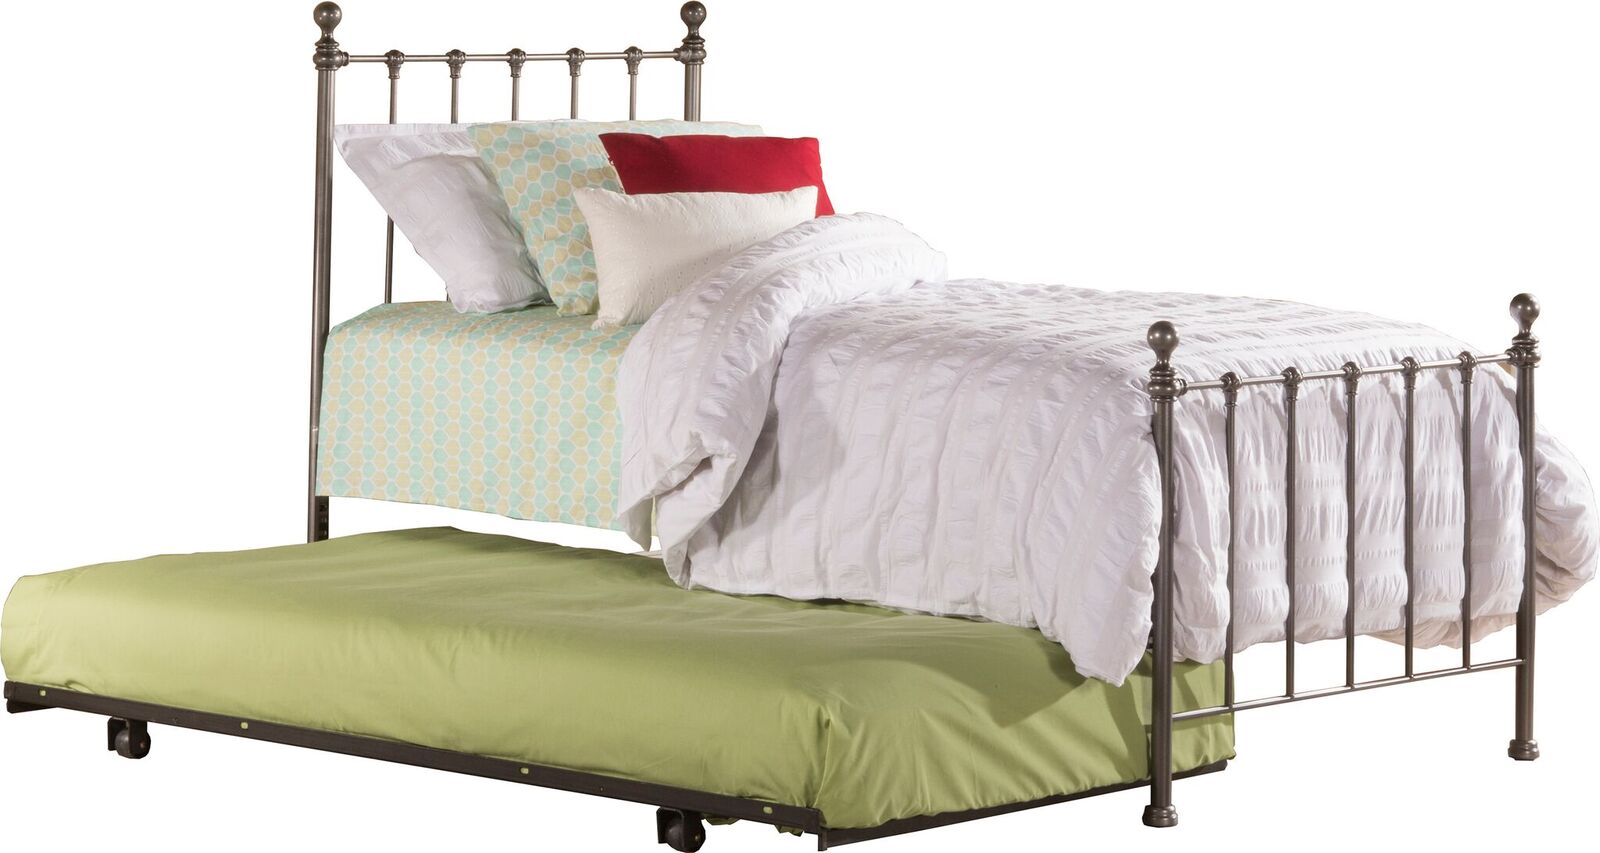 Molly Twin Bed Set W Suspension Deck Rollout Trundle Hillsdale